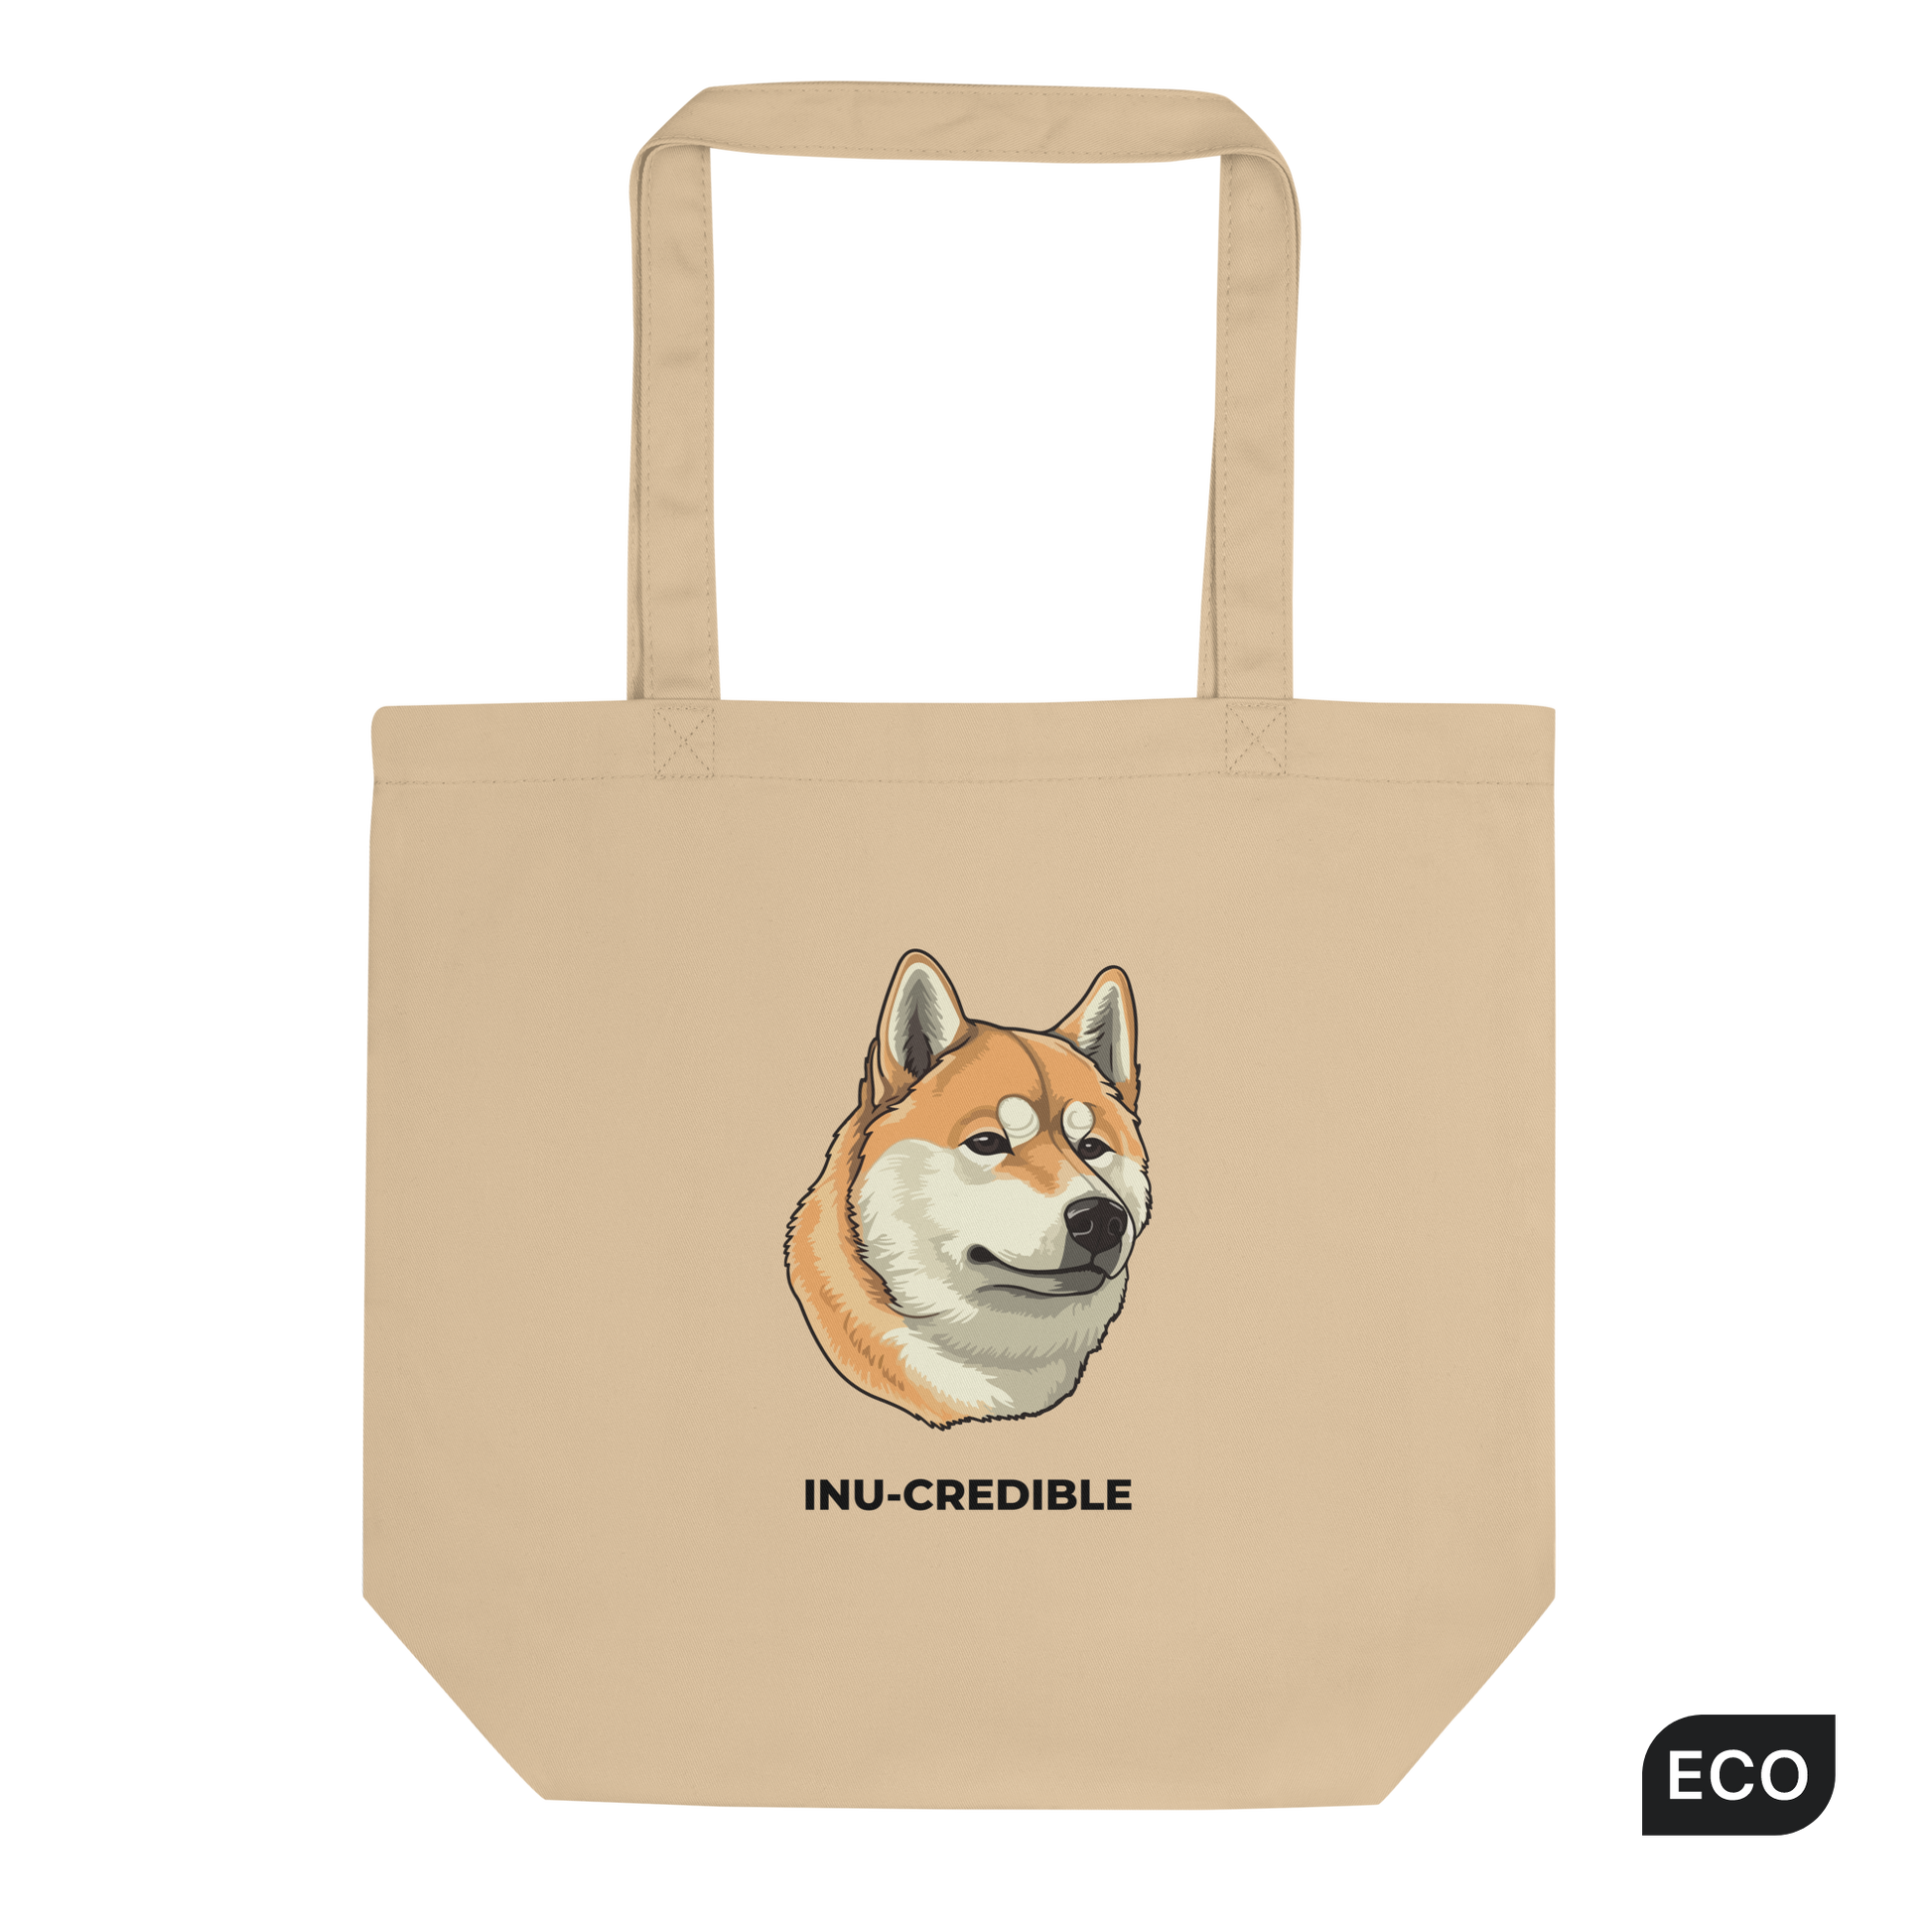 Oyster Colored Shiba Inu Eco Tote Bag featuring the Inu-Credible graphic - Shop Tote Bags Online - Boozy Fox